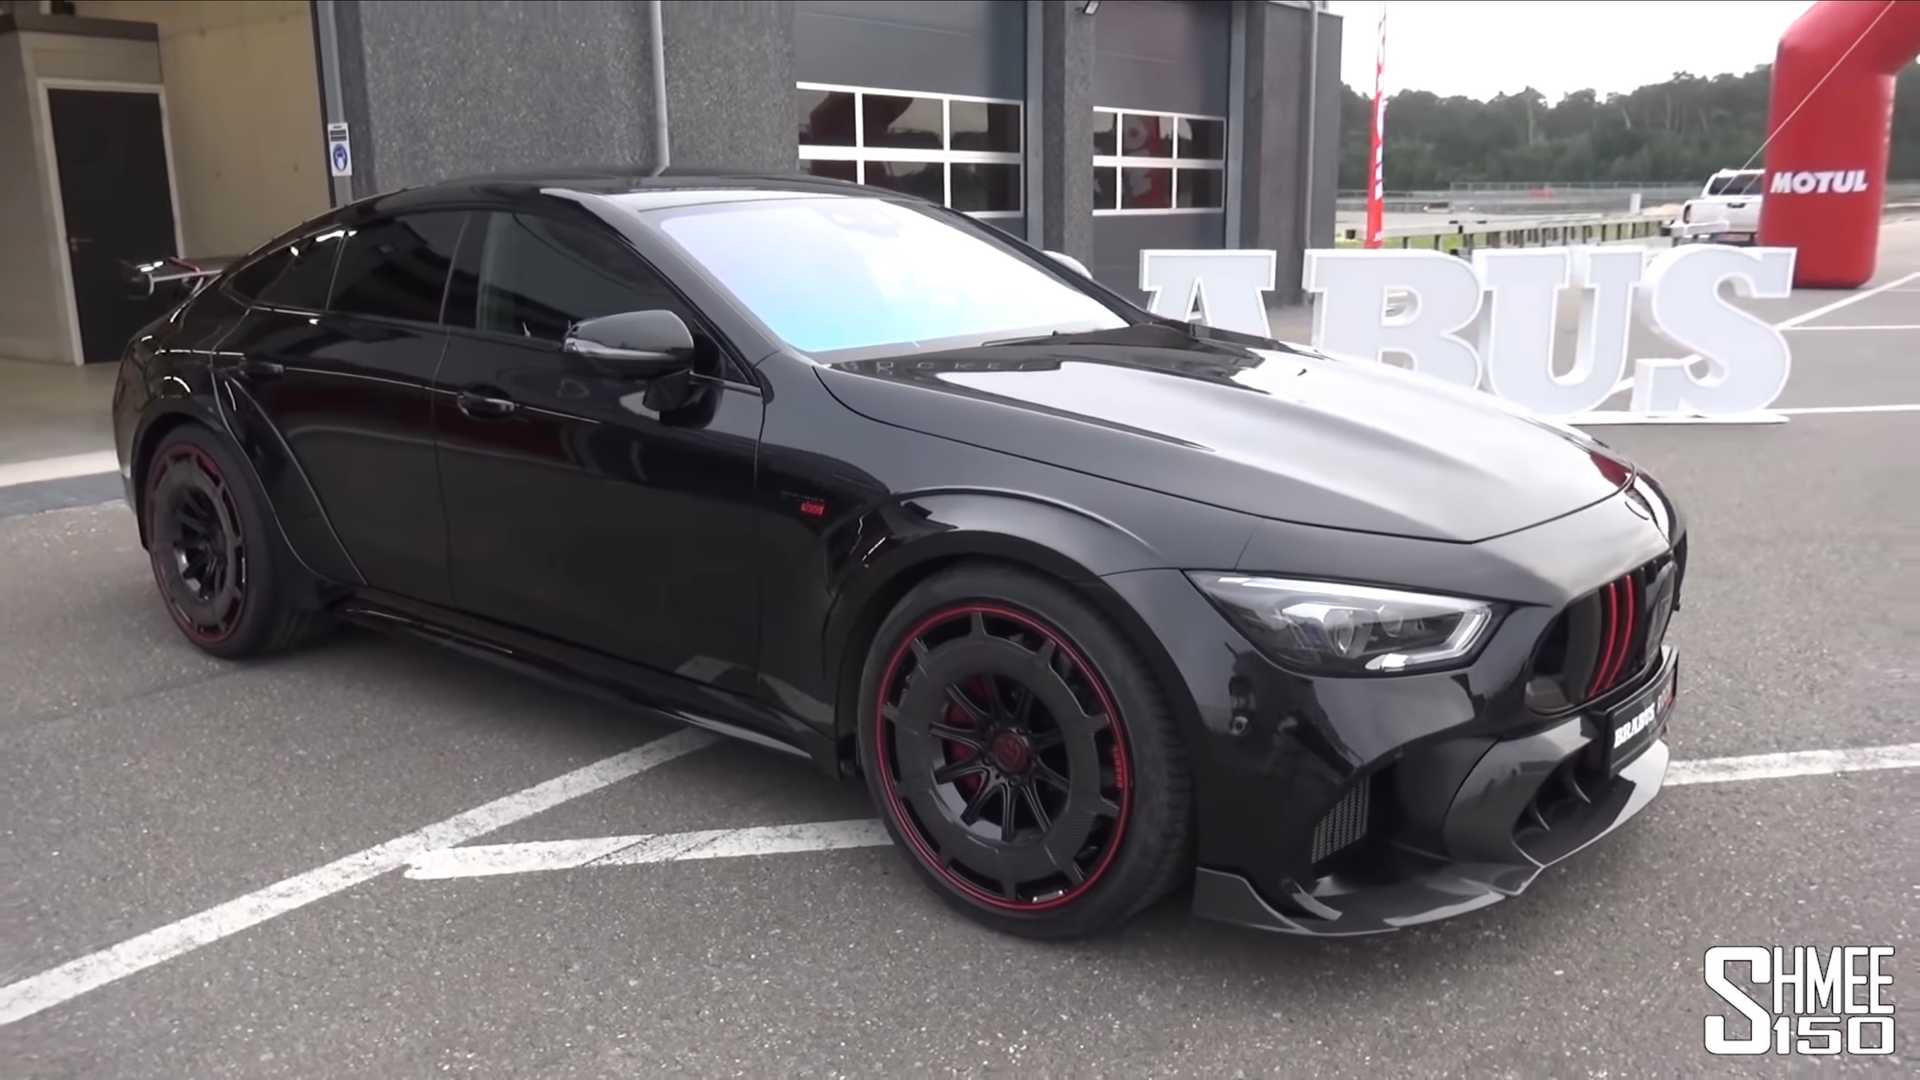 Brabus Rocket 900 Gets The Shmee Treatment In Walkaround Video Automoto Tale